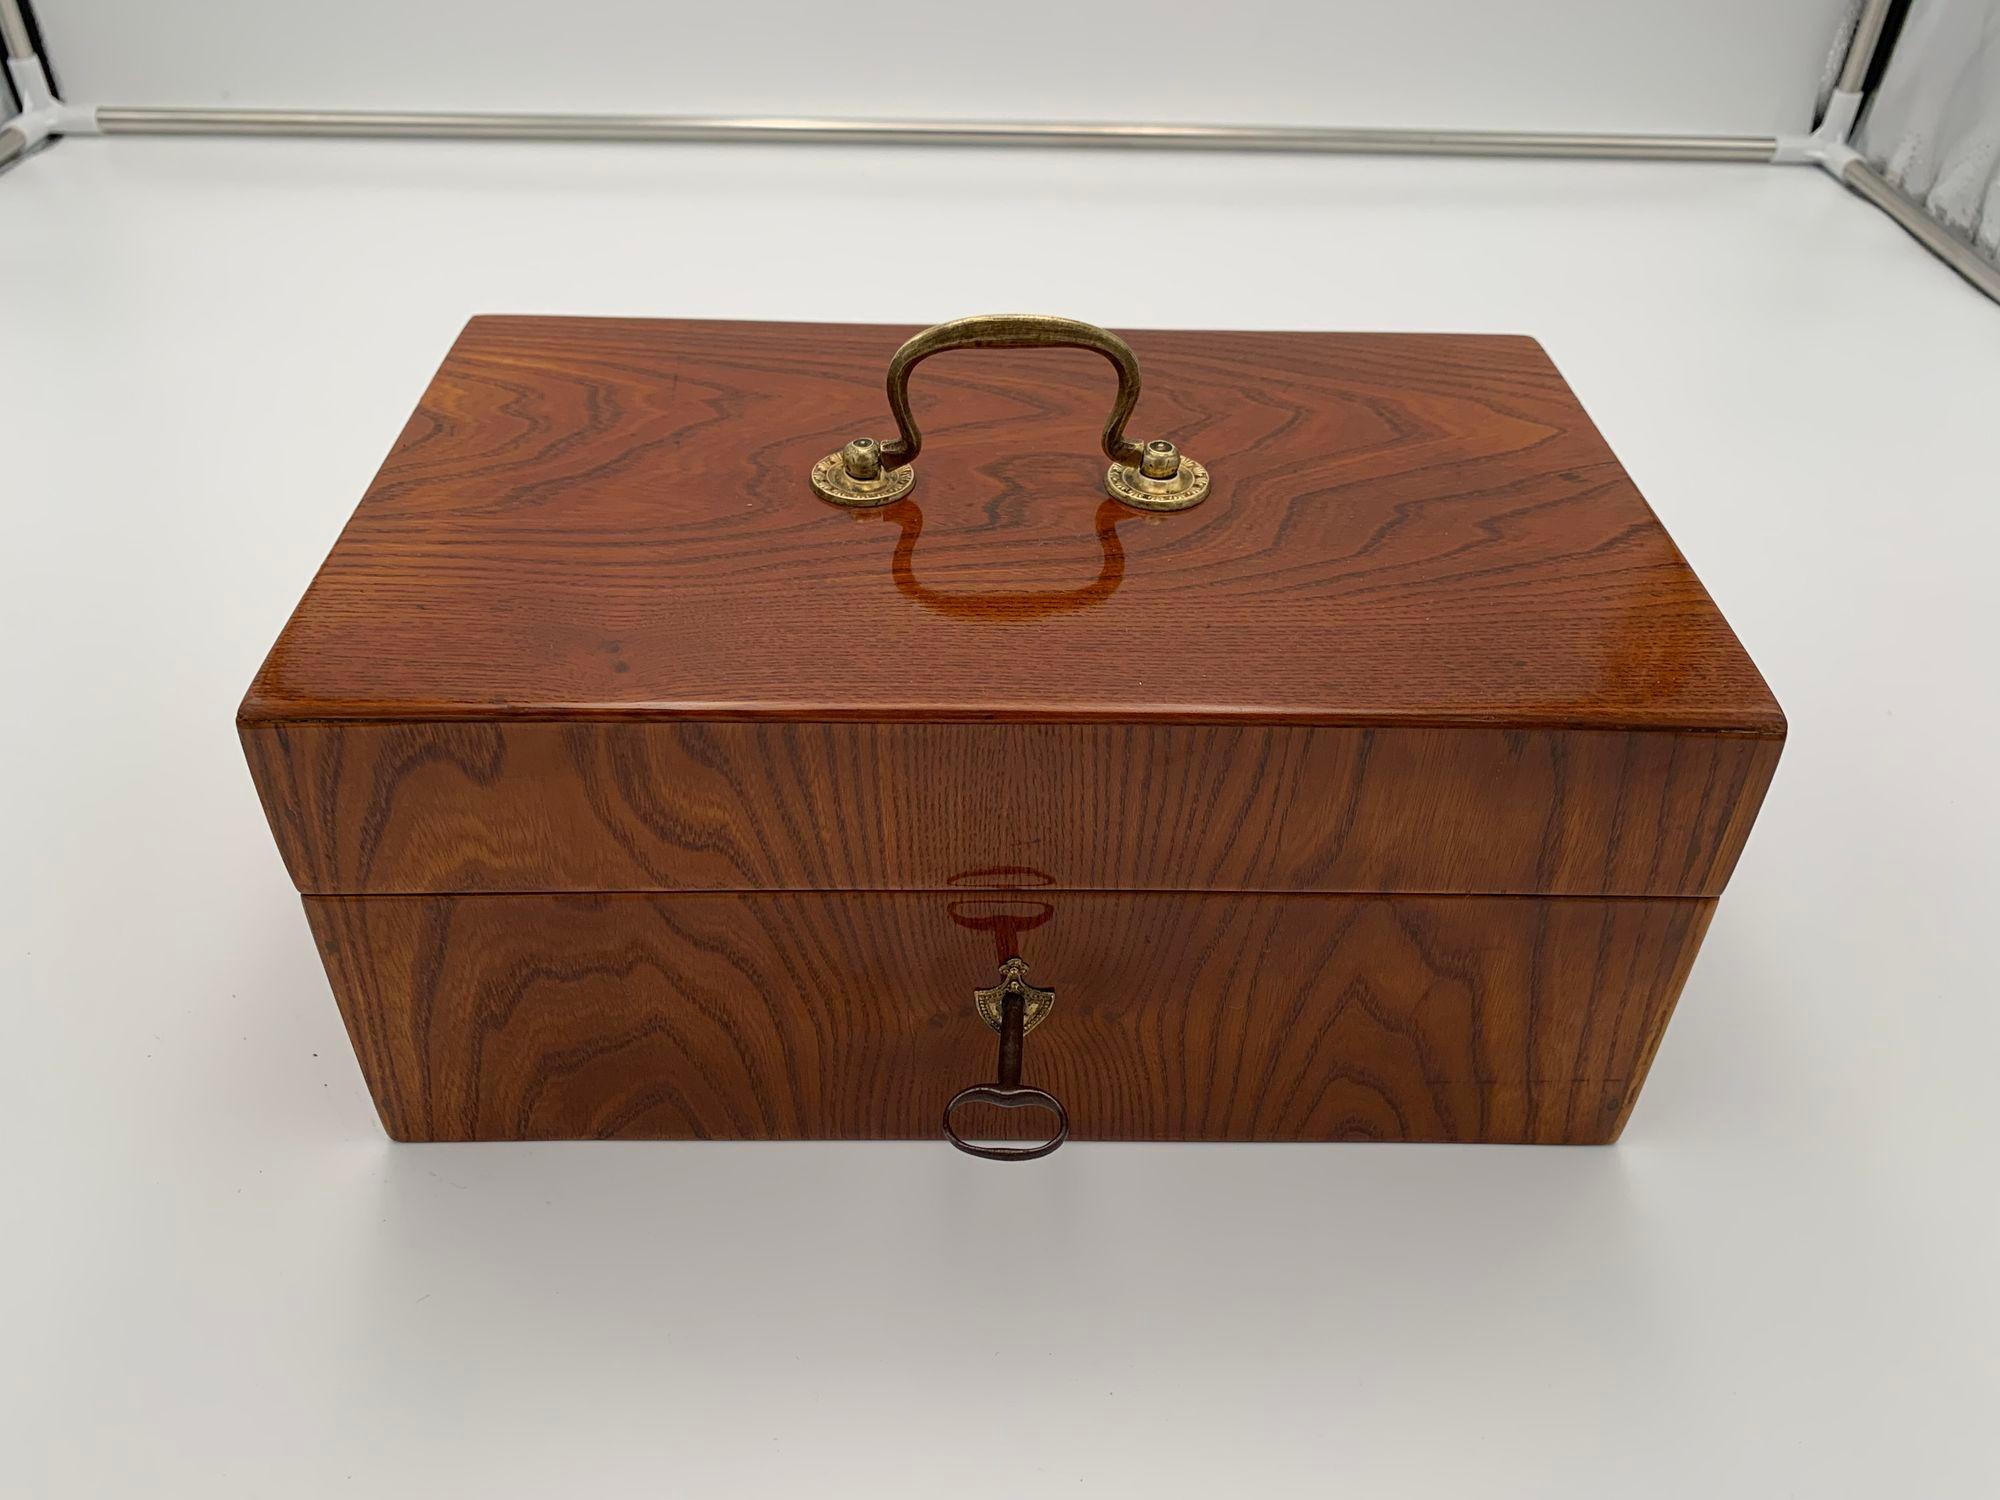 Biedermeier Box, Ash Veneer, South Germany circa 1830

Ash veneered on softwood.
Original brass handle and pressed brass fitting
Restored and shellac hand-polished

Dimensions: H 12.5 x W 28.5 x D 17 cm